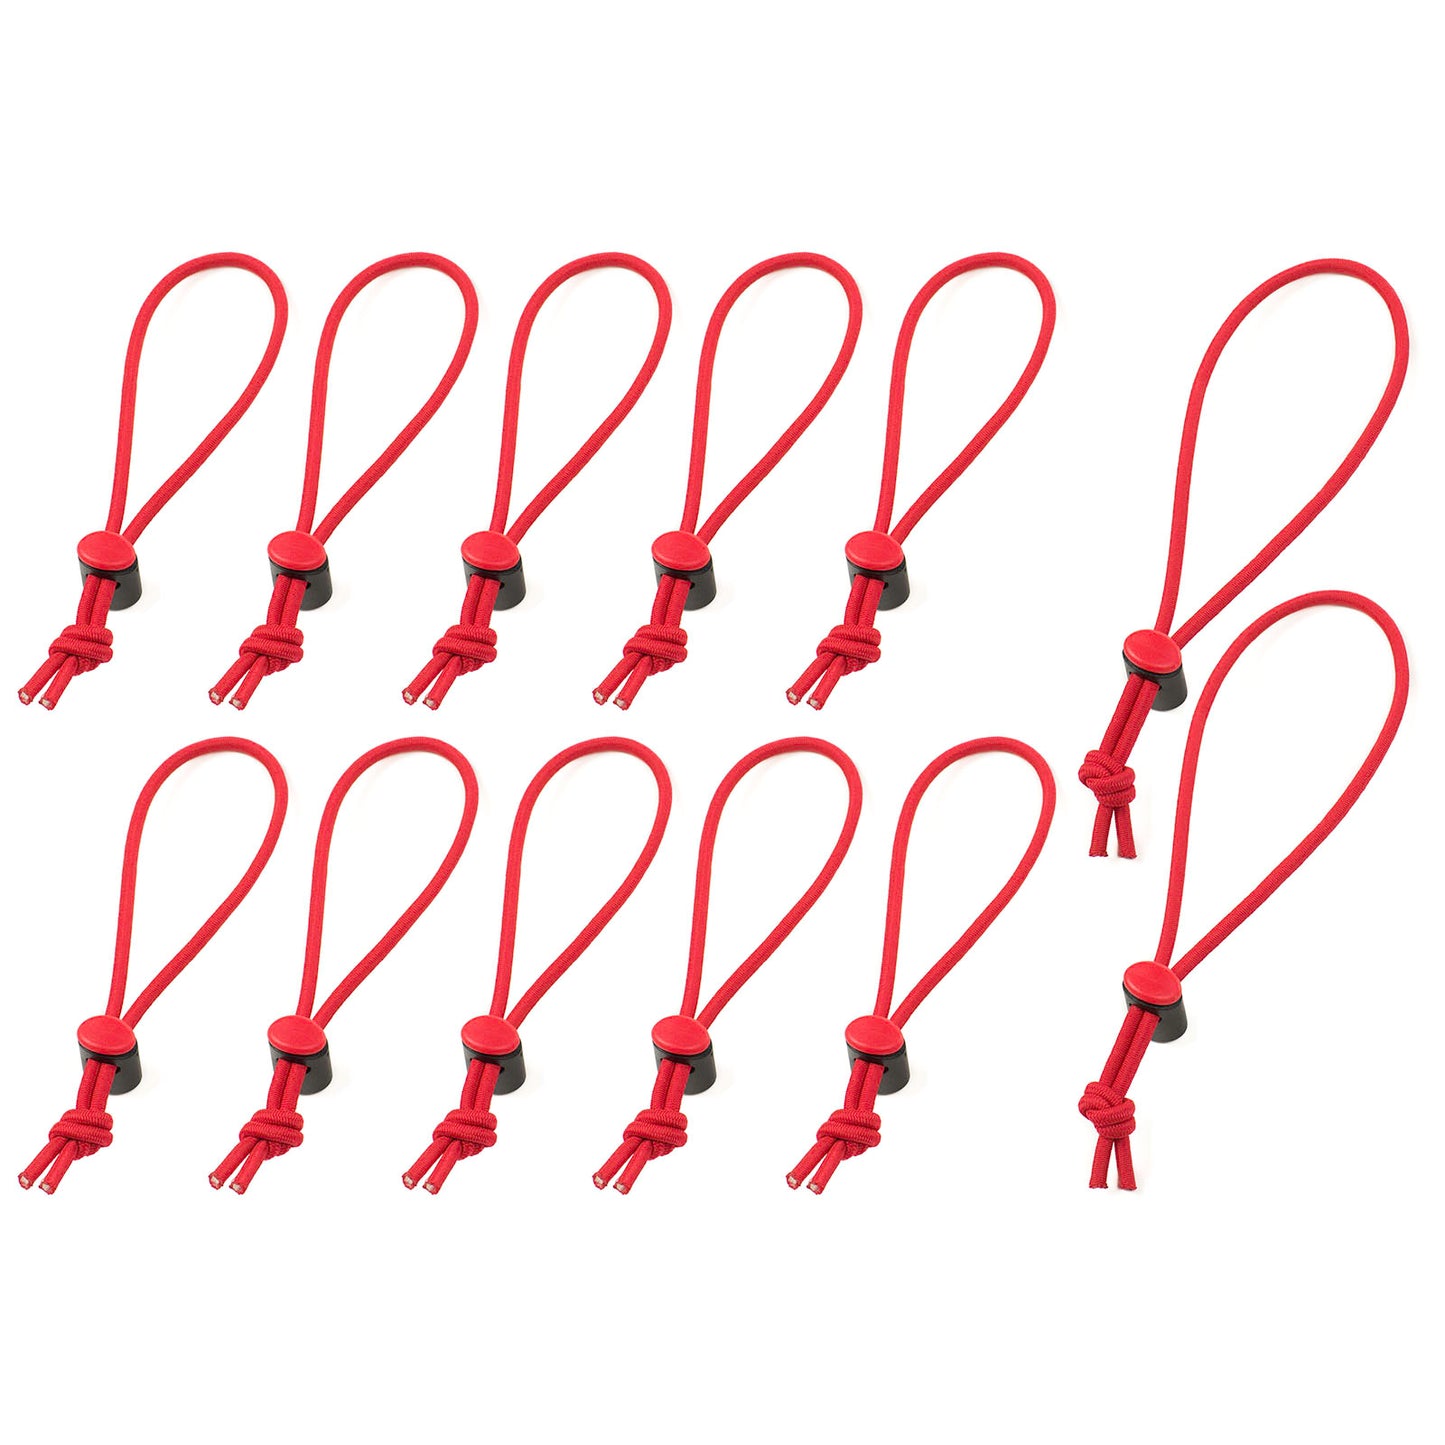 10 regular sized and 2 longer red whips for flexibility in organization